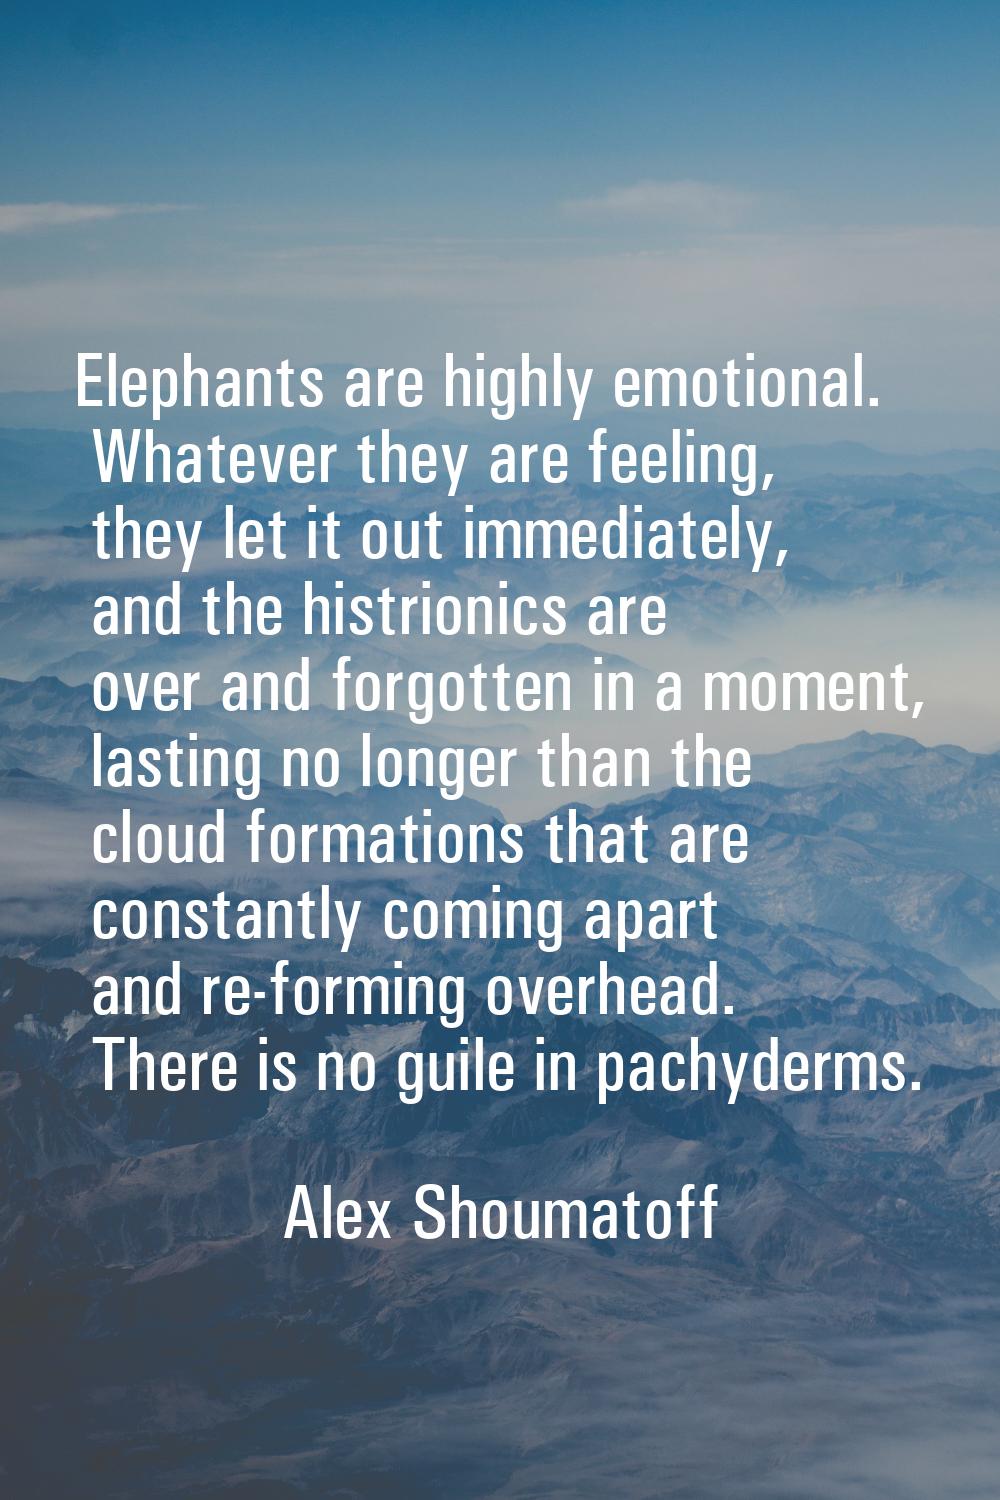 Elephants are highly emotional. Whatever they are feeling, they let it out immediately, and the his